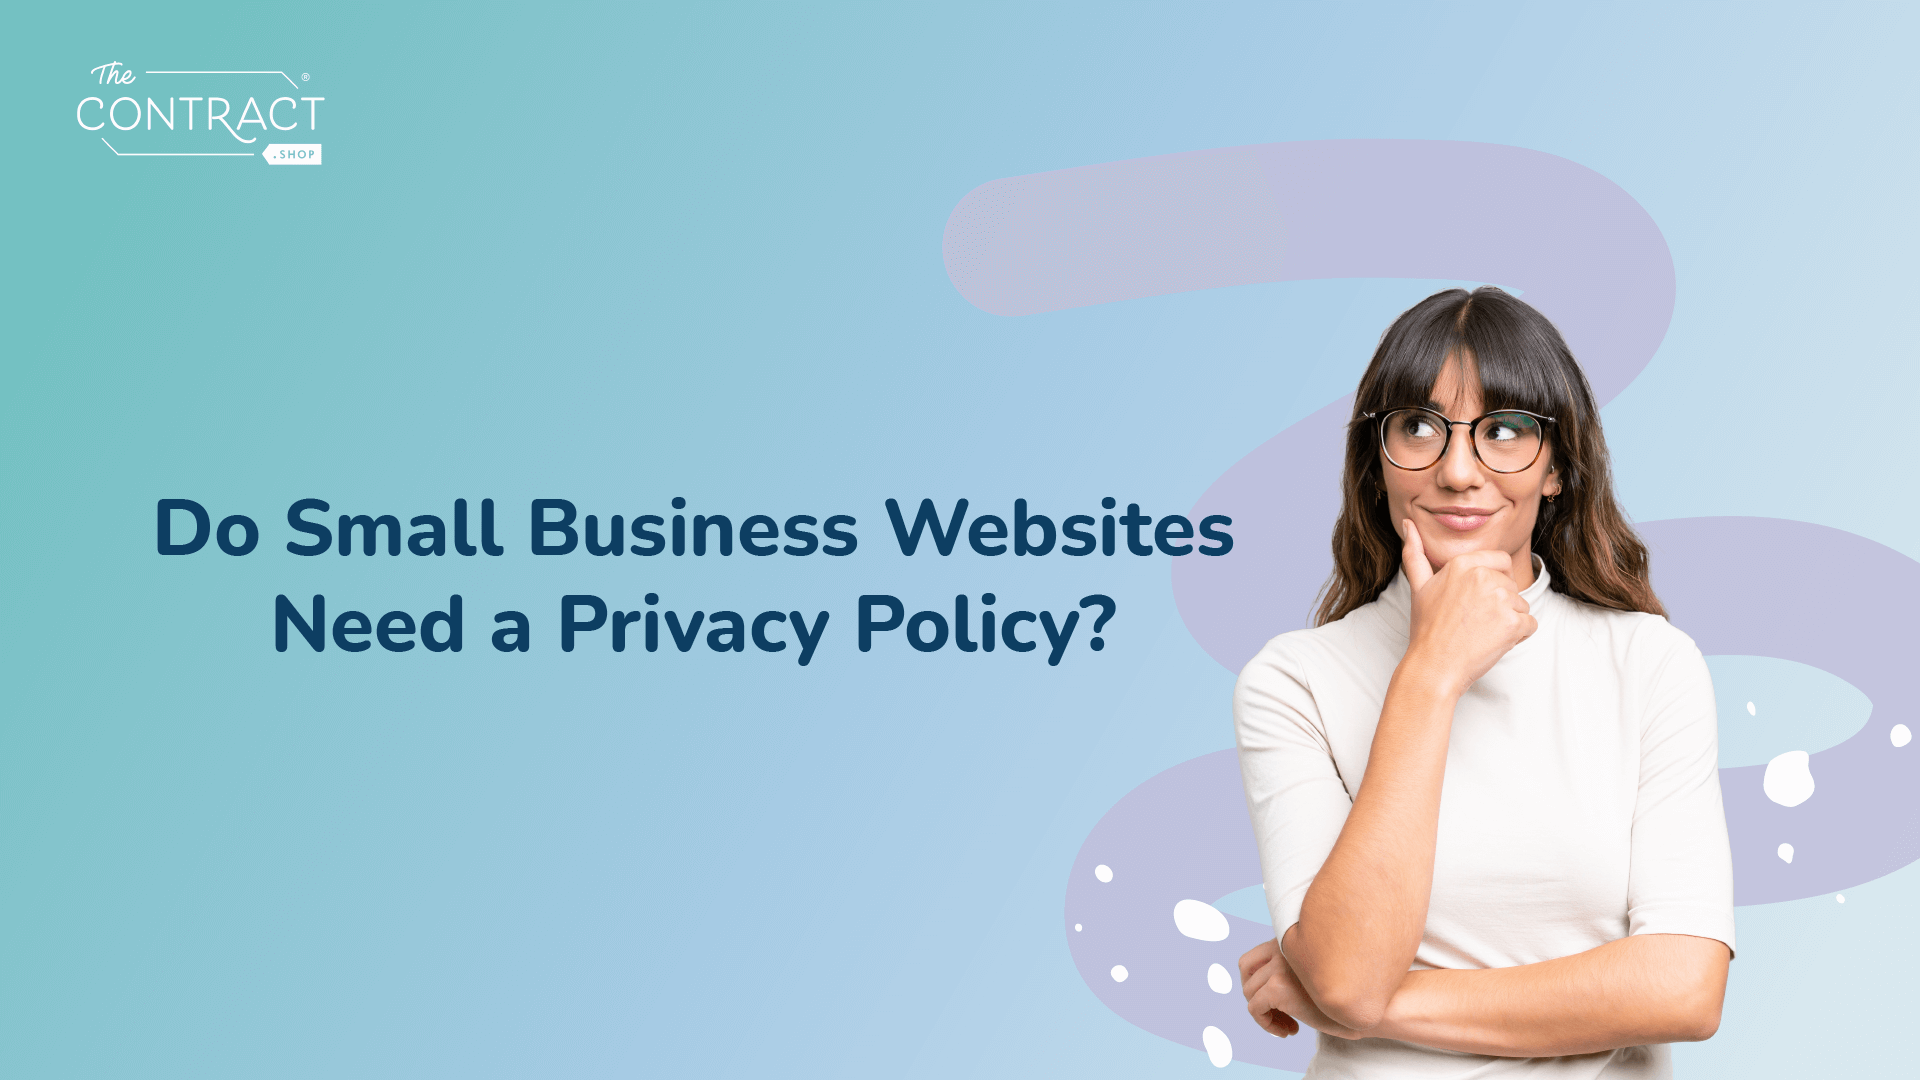 Do Small Business Websites Need a Privacy Policy?